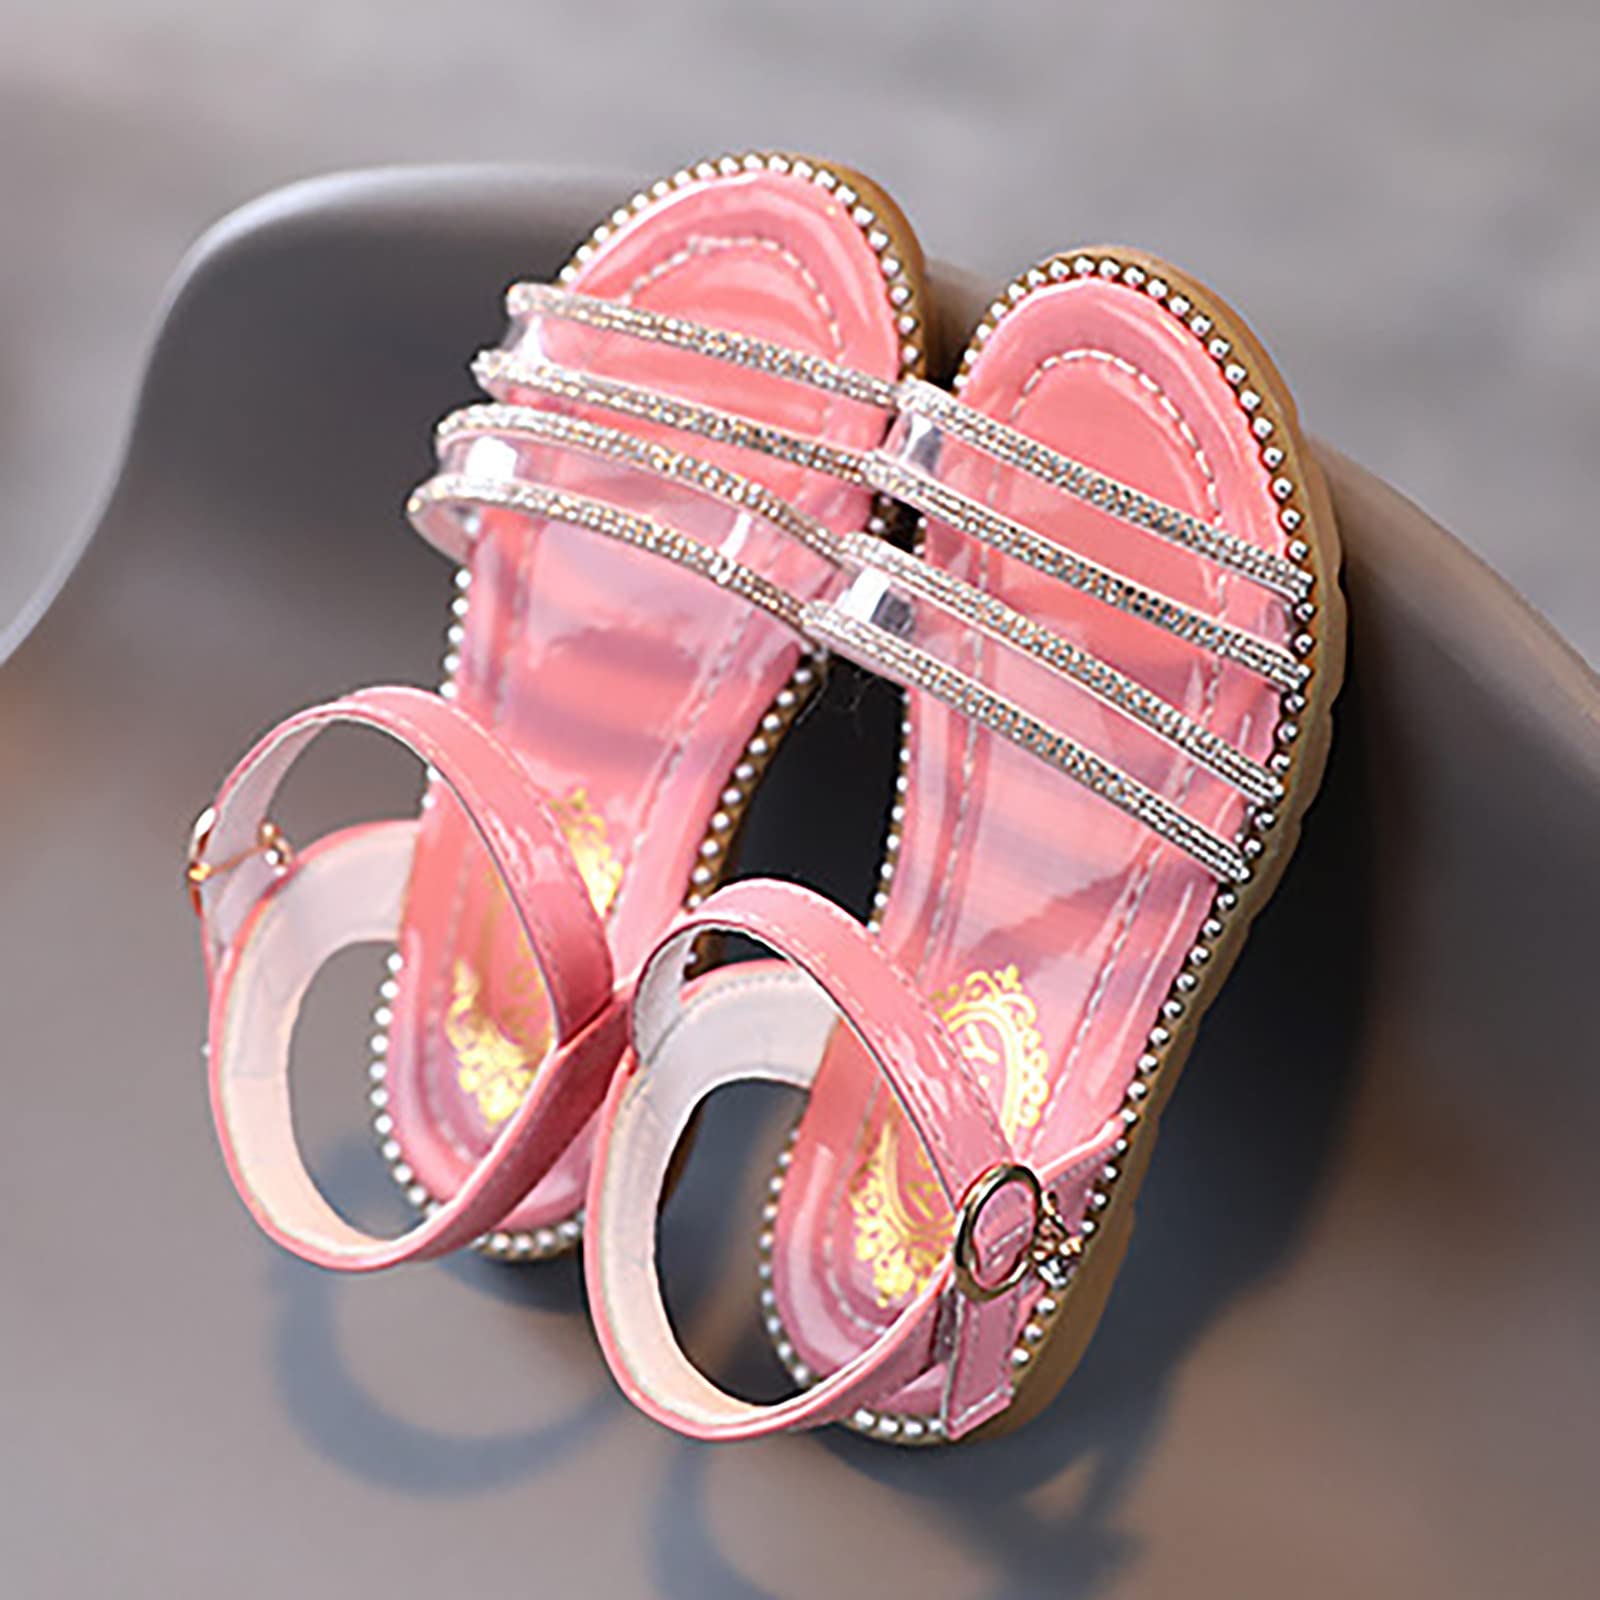 Shoe Slipper Fashion Spring Summer Children Sandals Girls Flat Open Toe Buckle Light And Robe for Girls And Slippers